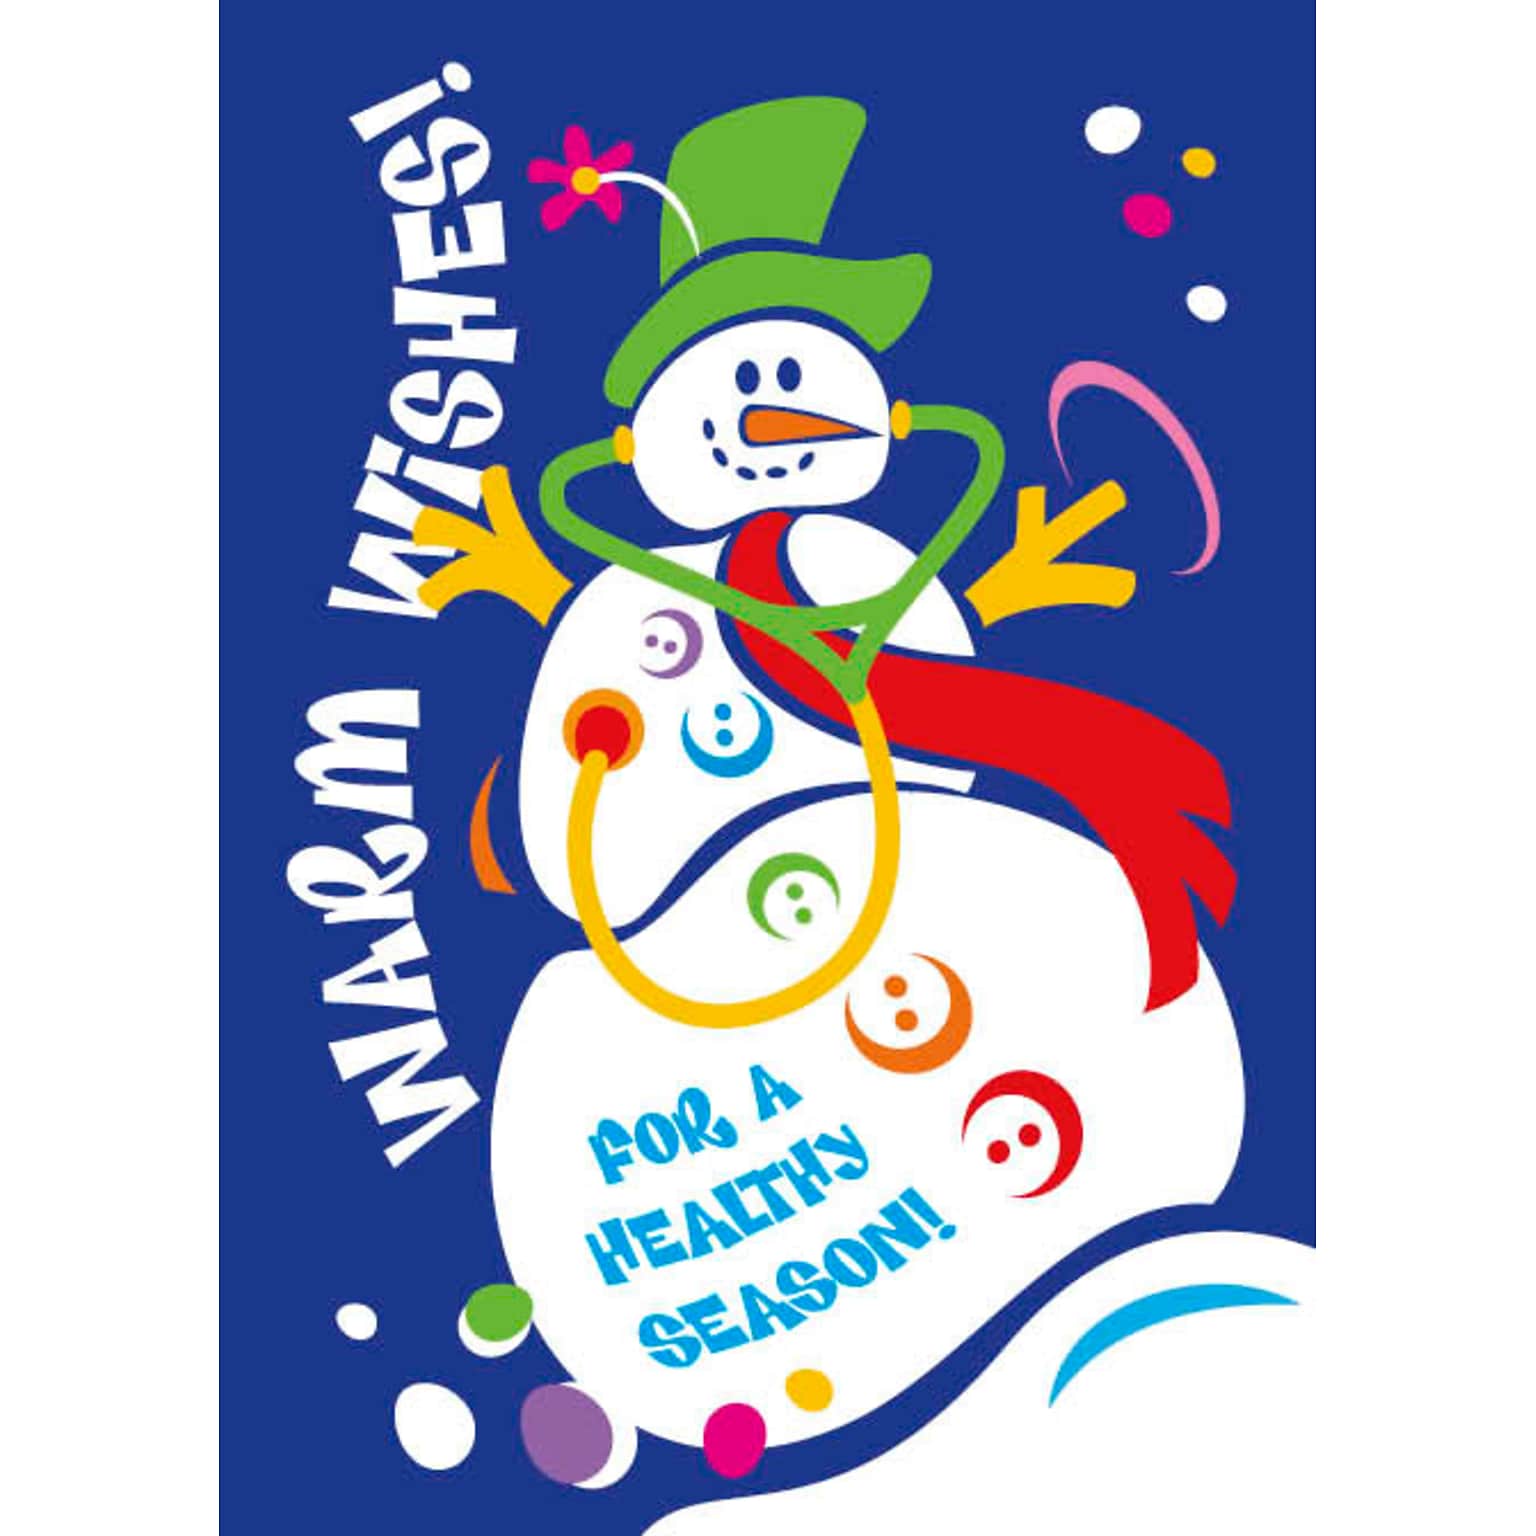 Warm Wishes For A Healthy Season Snowman Holiday Greeting Cards, With A7 Envelopes, 7 x 5, 25 Cards per Set